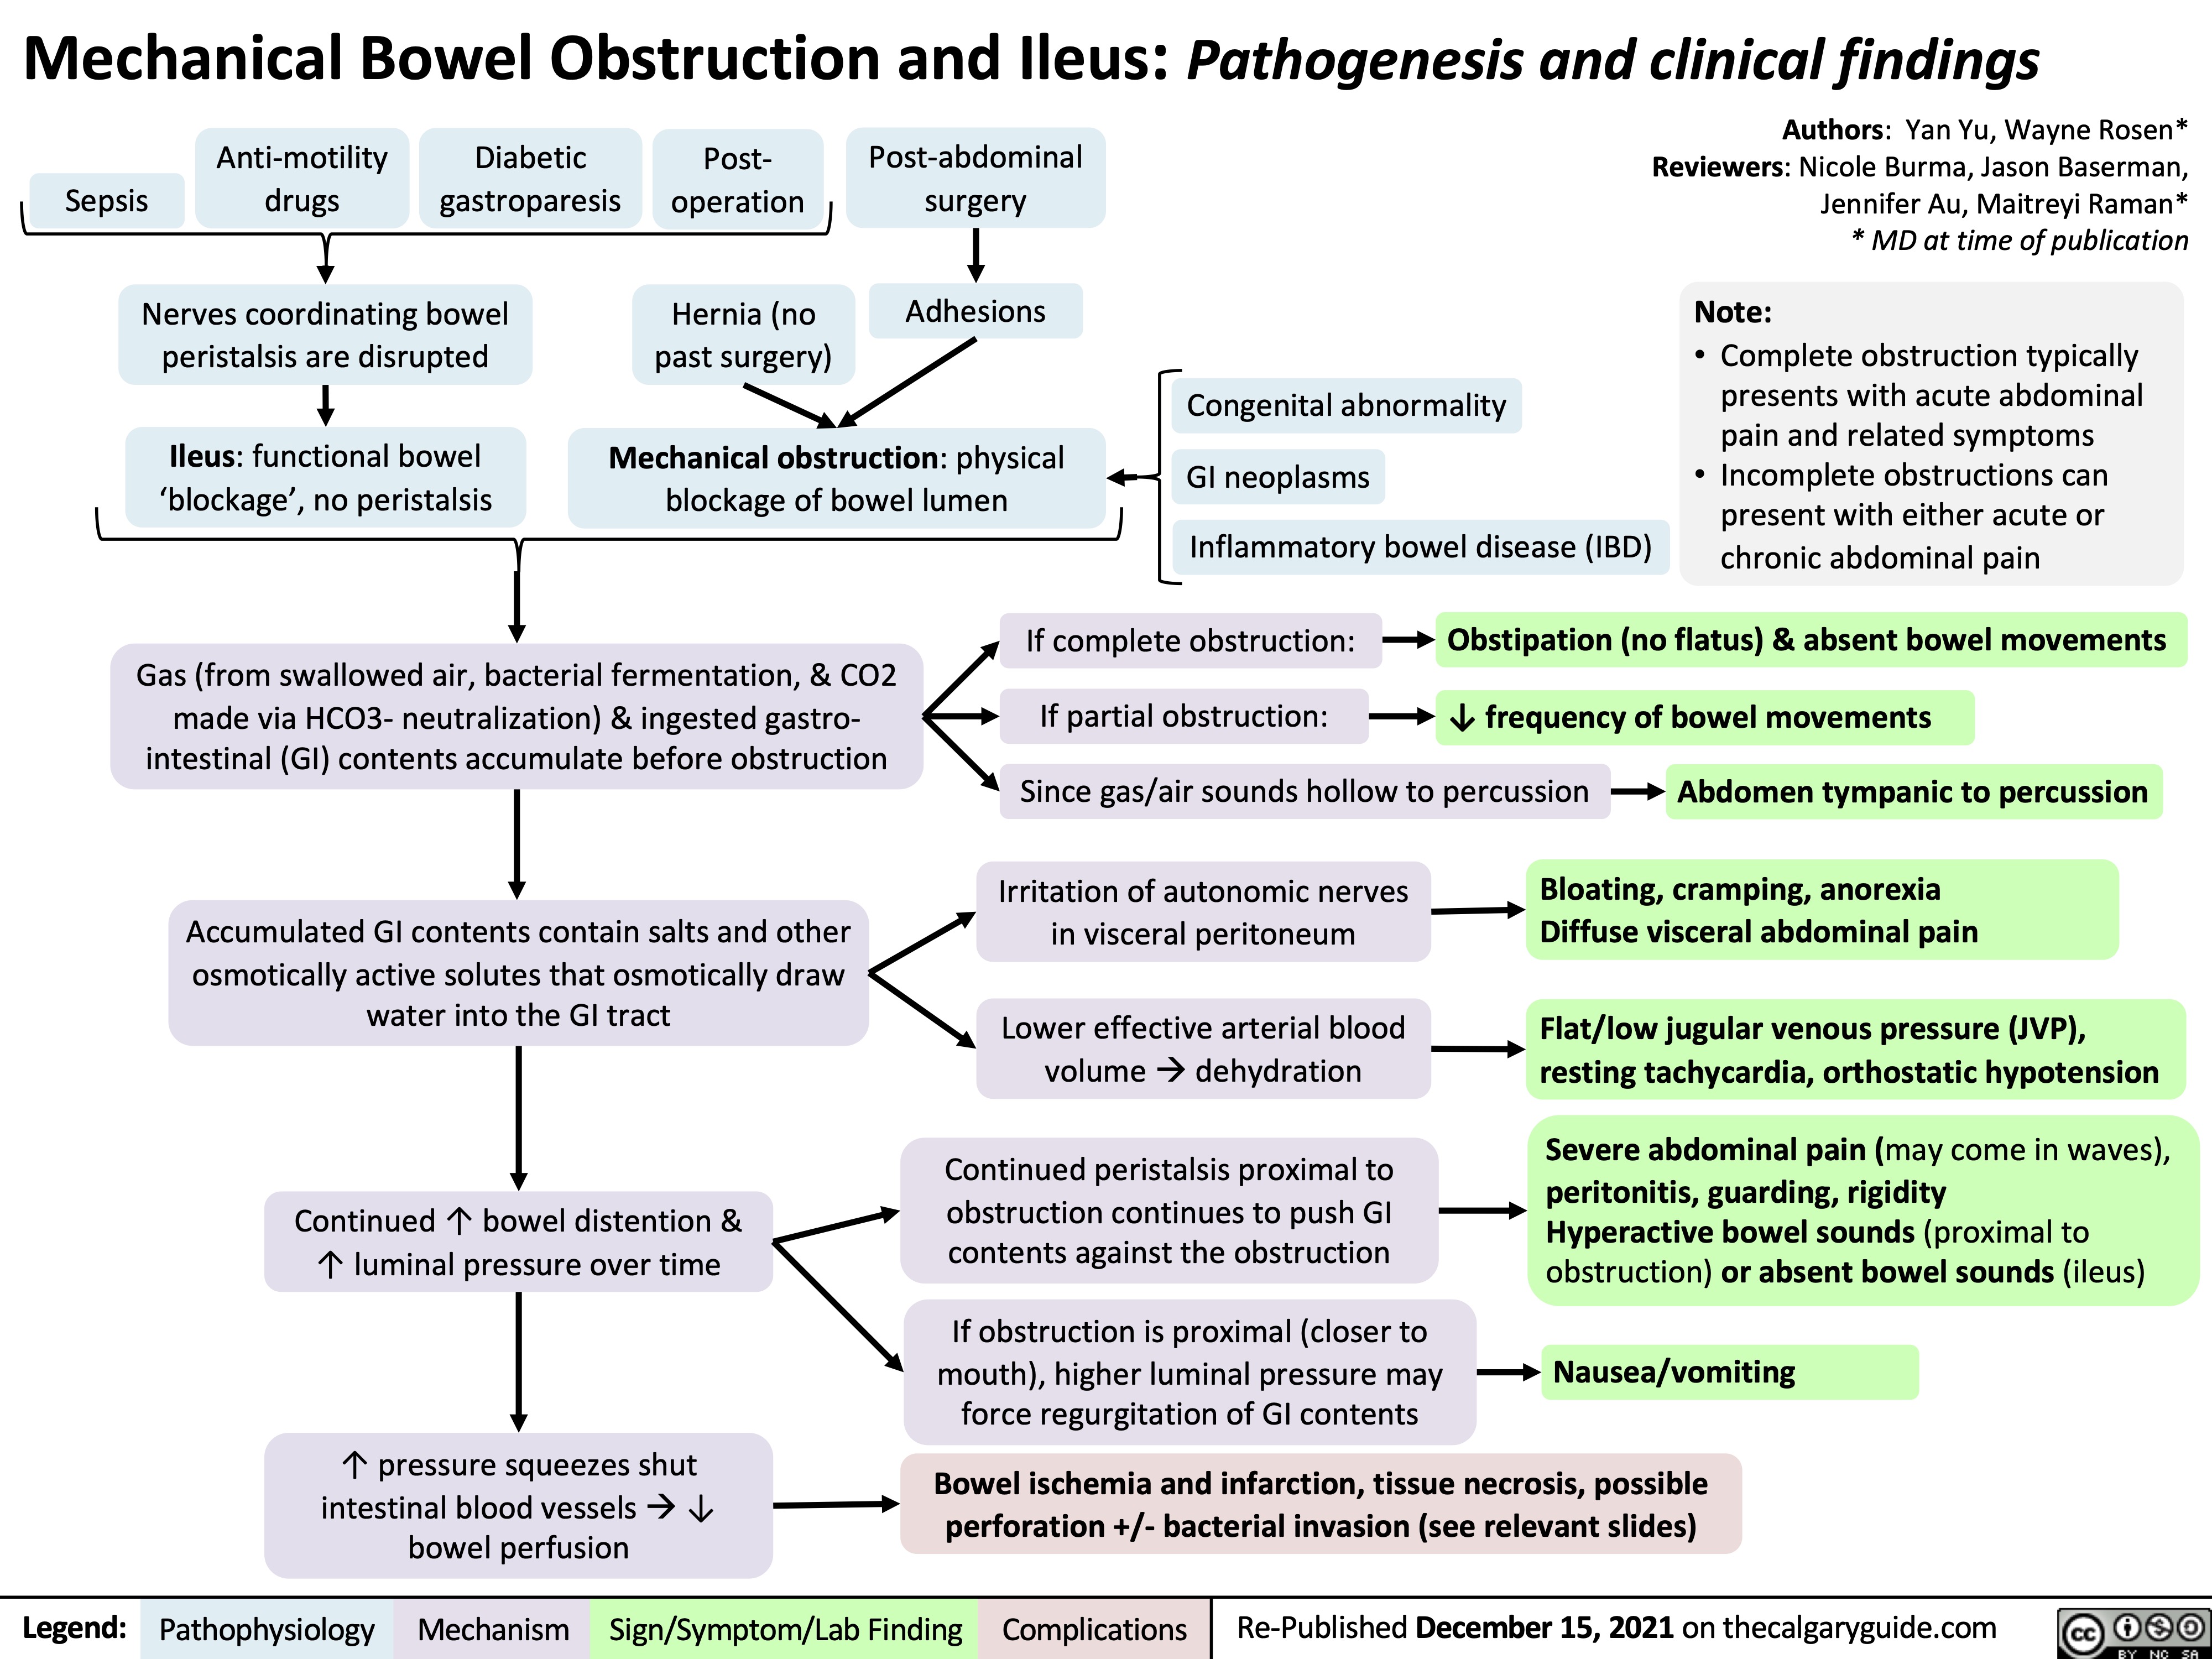 Mechanical Bowel Obstruction and Ileus: Pathogenesis and clinical findings
    Anti-motility Diabetic Sepsis drugs gastroparesis
Nerves coordinating bowel peristalsis are disrupted
Ileus: functional bowel ‘blockage’, no peristalsis
Post- operation
Hernia (no past surgery)
Post-abdominal surgery
Authors: Yan Yu, Wayne Rosen* Reviewers: Nicole Burma, Jason Baserman, Jennifer Au, Maitreyi Raman* * MD at time of publication
      Adhesions Note:
• Complete obstruction typically
  presents with acute abdominal
pain and related symptoms • Incomplete obstructions can present with either acute or
 Congenital abnormality GI neoplasms
If partial obstruction: ↓ frequency of bowel movements
Since gas/air sounds hollow to percussion Abdomen tympanic to percussion
  Mechanical obstruction: physical blockage of bowel lumen
  Inflammatory bowel disease (IBD)
   Gas (from swallowed air, bacterial fermentation, & CO2 made via HCO3- neutralization) & ingested gastro- intestinal (GI) contents accumulate before obstruction
Accumulated GI contents contain salts and other osmotically active solutes that osmotically draw water into the GI tract
Continued ↑ bowel distention & ↑ luminal pressure over time
↑ pressure squeezes shut intestinal blood vesselsà↓ bowel perfusion
chronic abdominal pain
If complete obstruction: Obstipation (no flatus) & absent bowel movements
       Irritation of autonomic nerves in visceral peritoneum
Lower effective arterial blood volumeàdehydration
Continued peristalsis proximal to obstruction continues to push GI contents against the obstruction
If obstruction is proximal (closer to mouth), higher luminal pressure may force regurgitation of GI contents
Bloating, cramping, anorexia Diffuse visceral abdominal pain
Flat/low jugular venous pressure (JVP), resting tachycardia, orthostatic hypotension
Severe abdominal pain (may come in waves), peritonitis, guarding, rigidity
Hyperactive bowel sounds (proximal to obstruction) or absent bowel sounds (ileus)
Nausea/vomiting
              Bowel ischemia and infarction, tissue necrosis, possible perforation +/- bacterial invasion (see relevant slides)
  Legend:
 Pathophysiology
 Mechanism
Sign/Symptom/Lab Finding
 Complications
Re-Published December 15, 2021 on thecalgaryguide.com
   